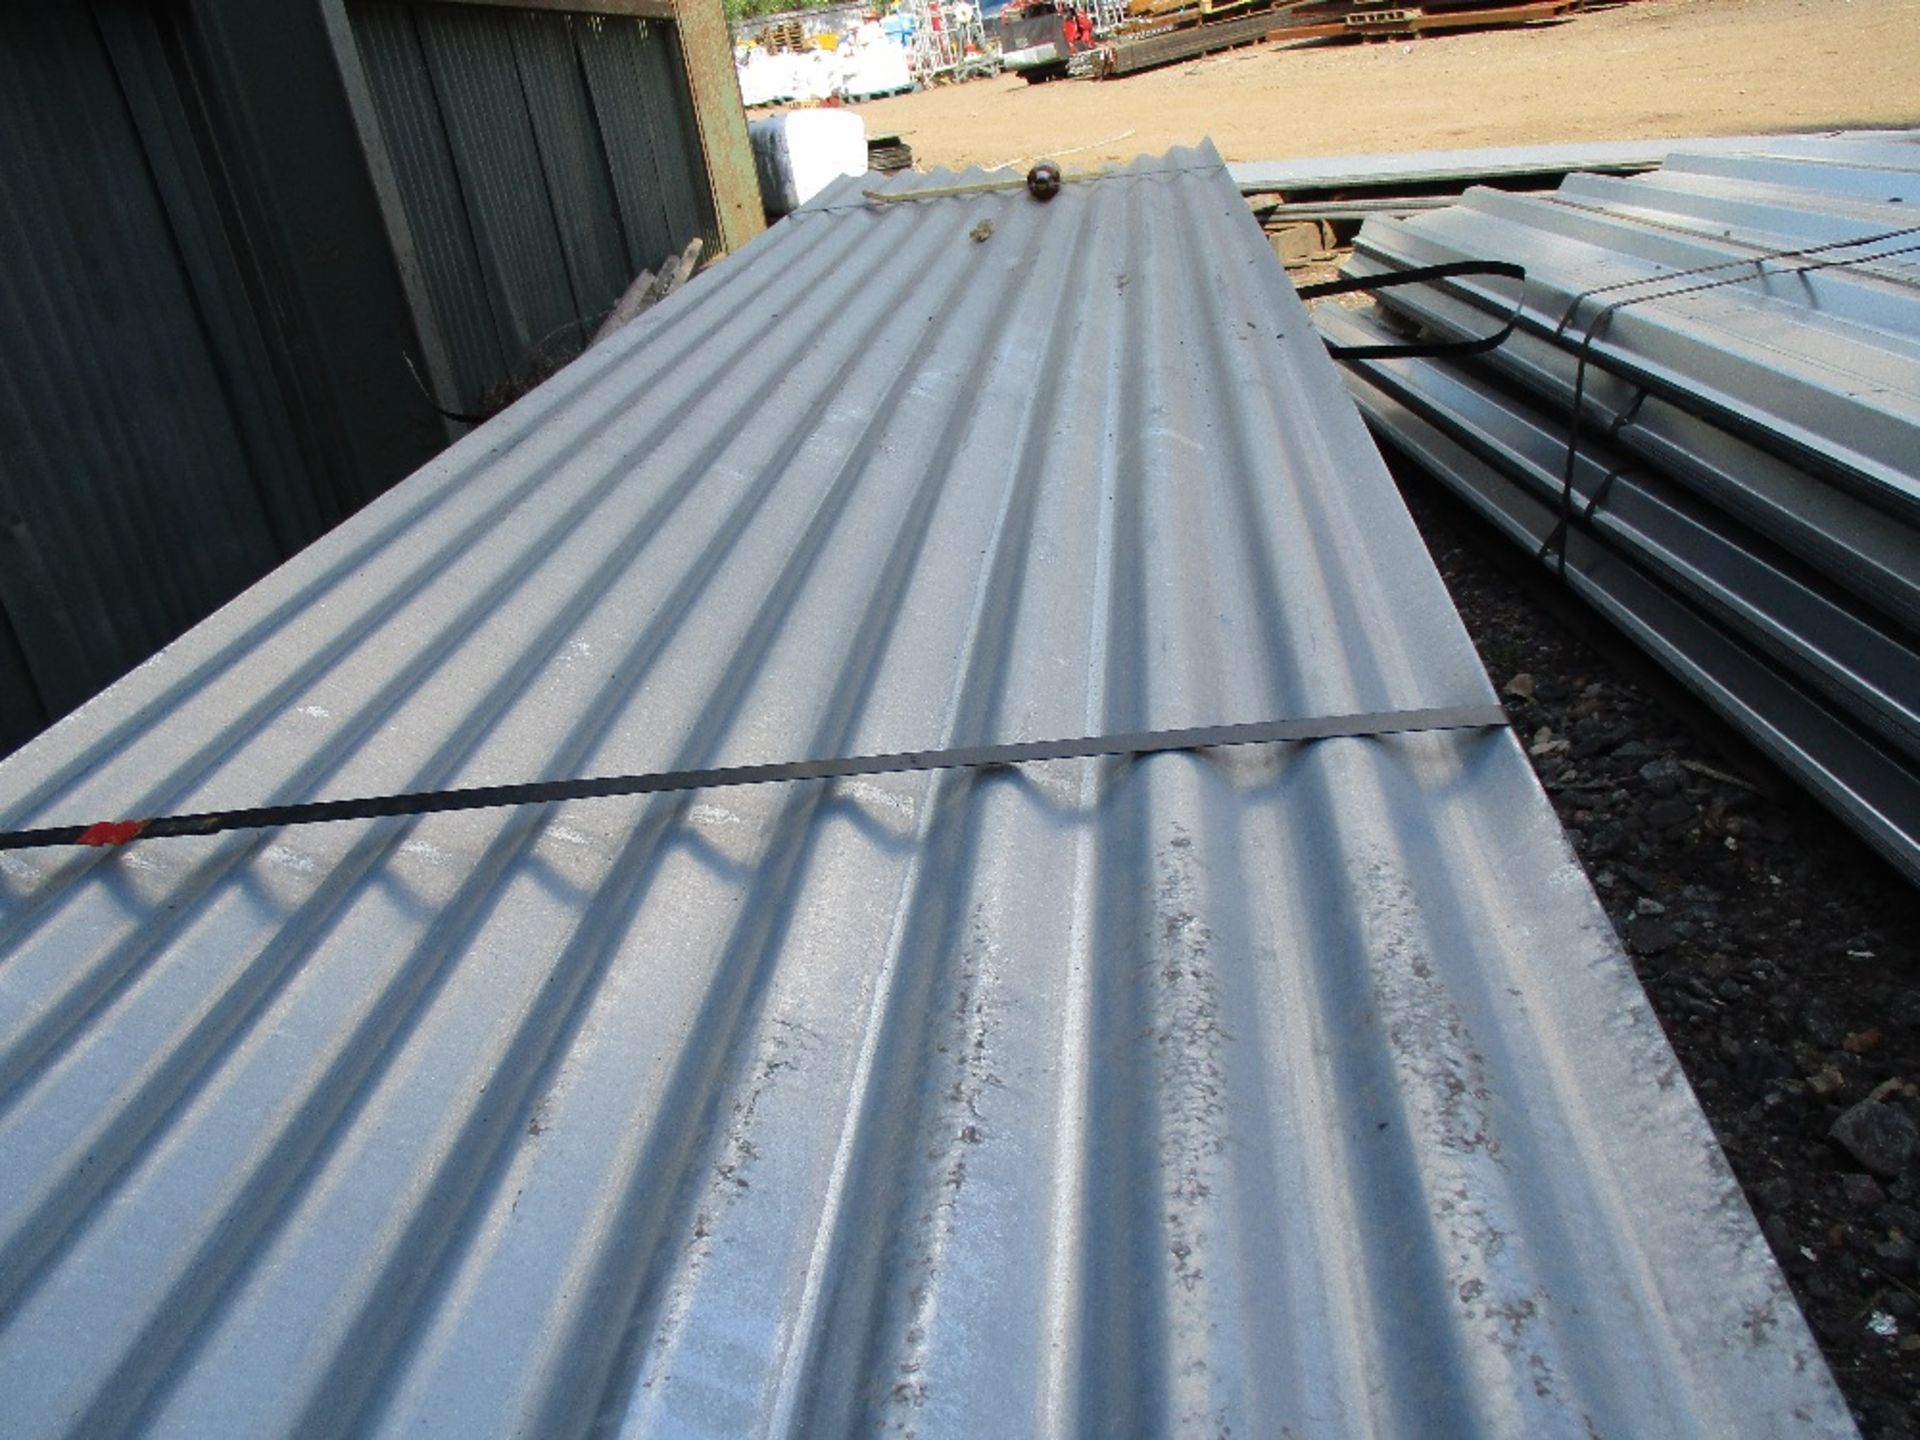 75NO 12FT CORRUGATED ROOF SHEETS, SOLD IN 3 PACKS OF 25NO